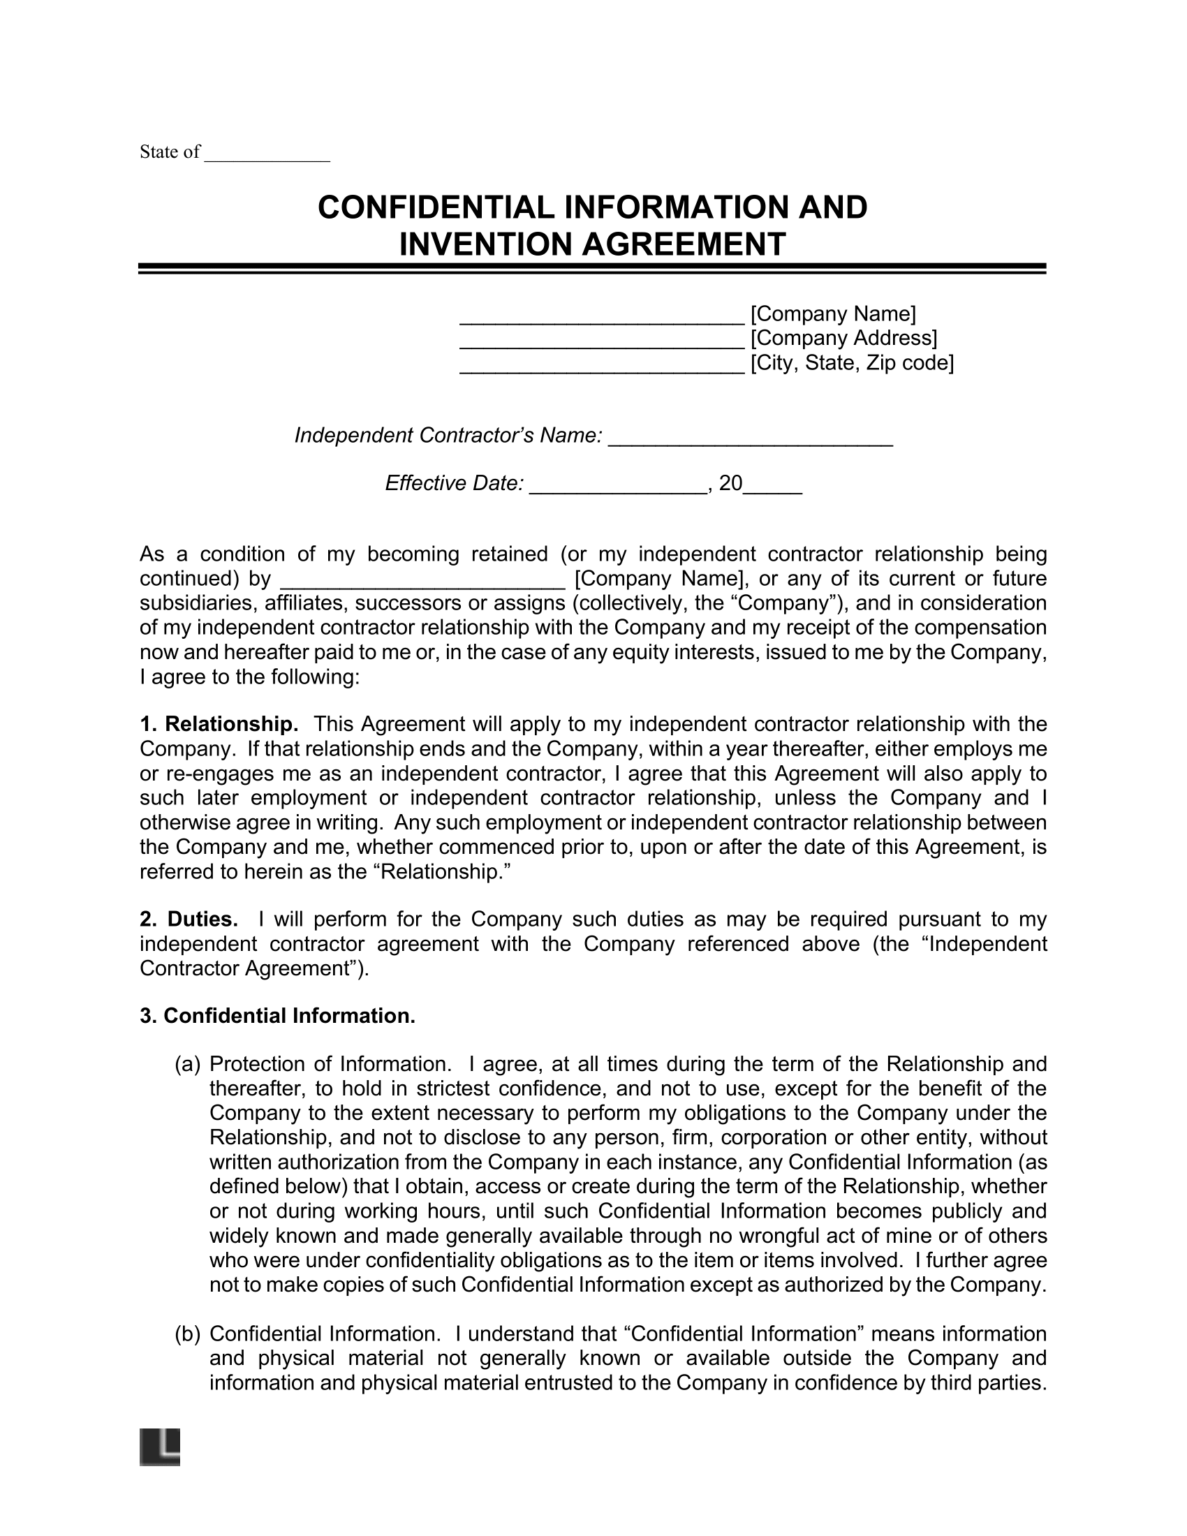 confidentiality and invention assignment agreement with the company